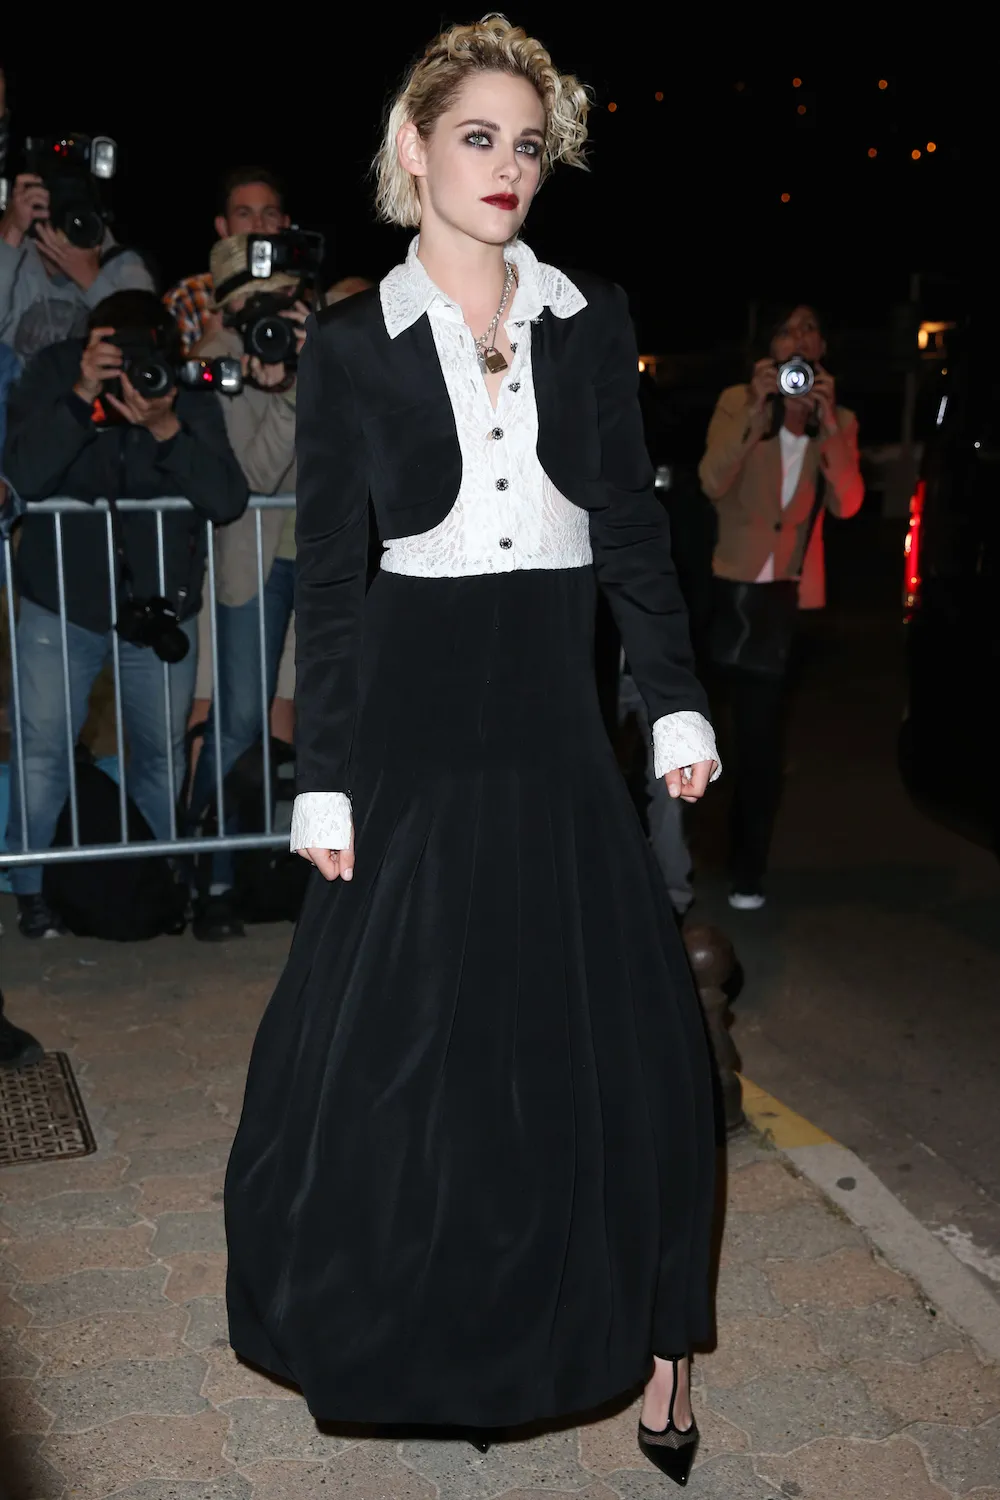 Kristen outfit at Cannes so inspired by Tim Burton -